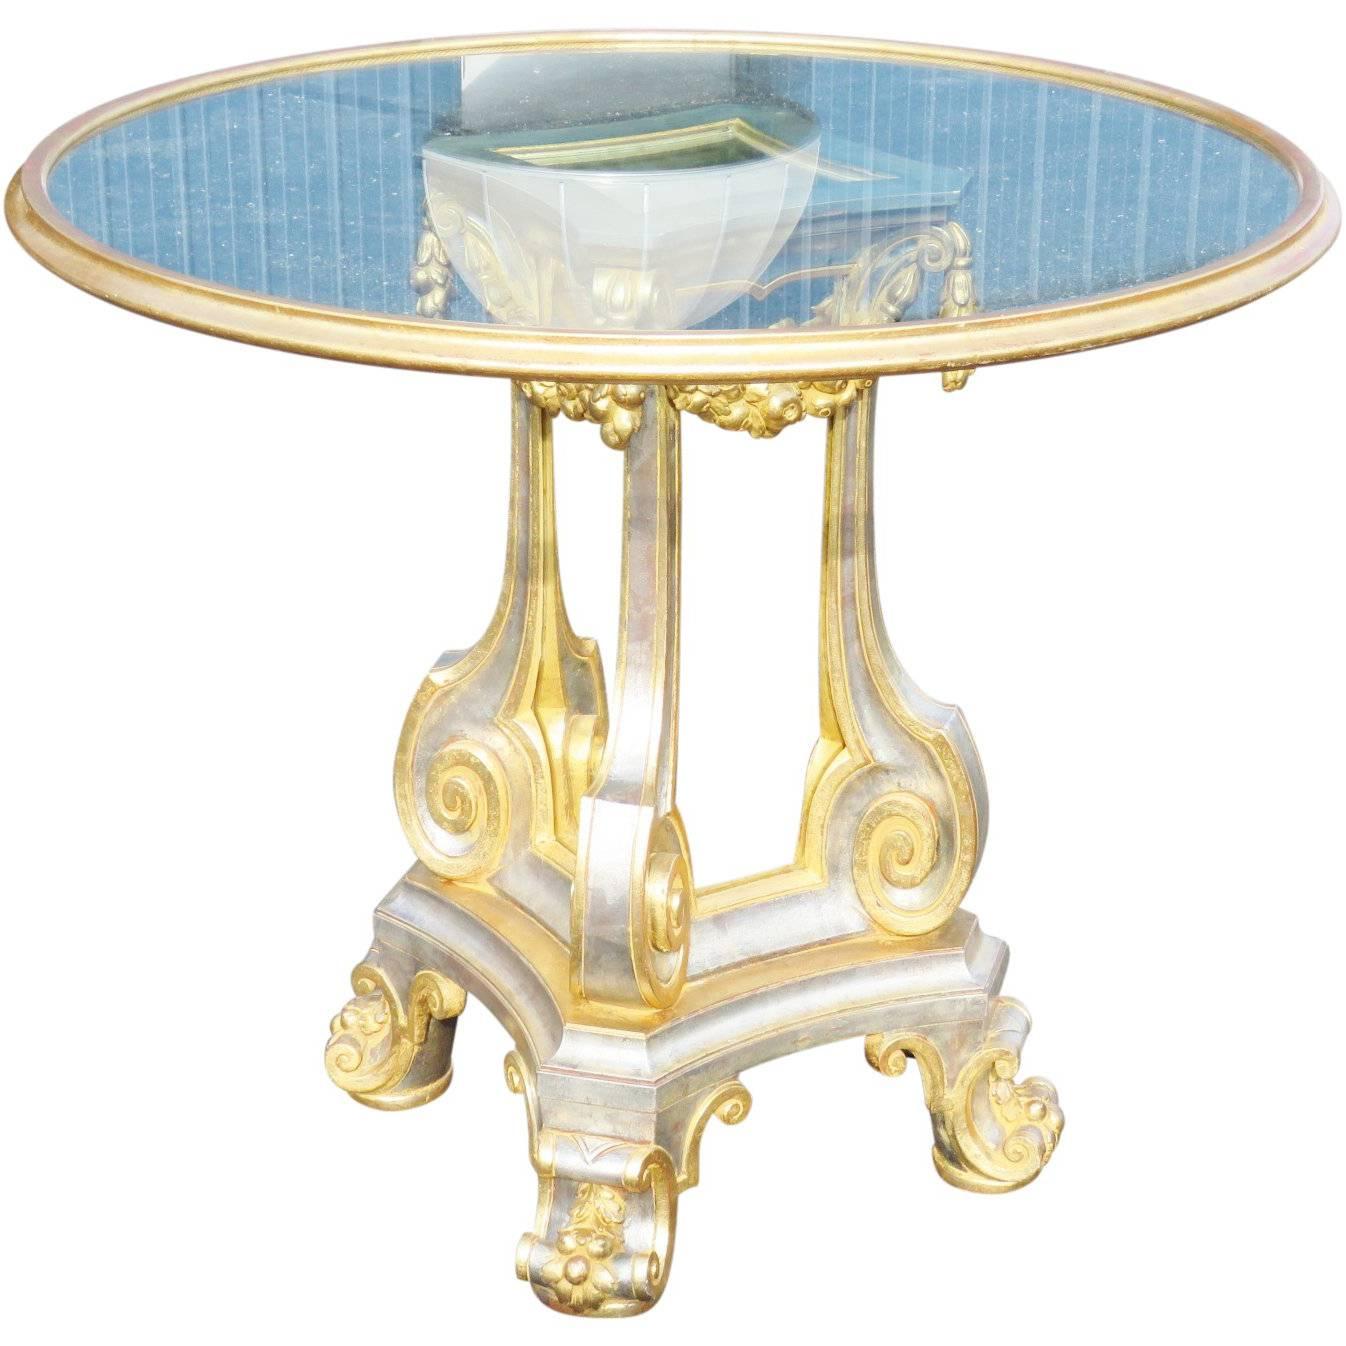 French Louis XV Parcel Gilt Silver and Gold Leaf Mirrored Center Table